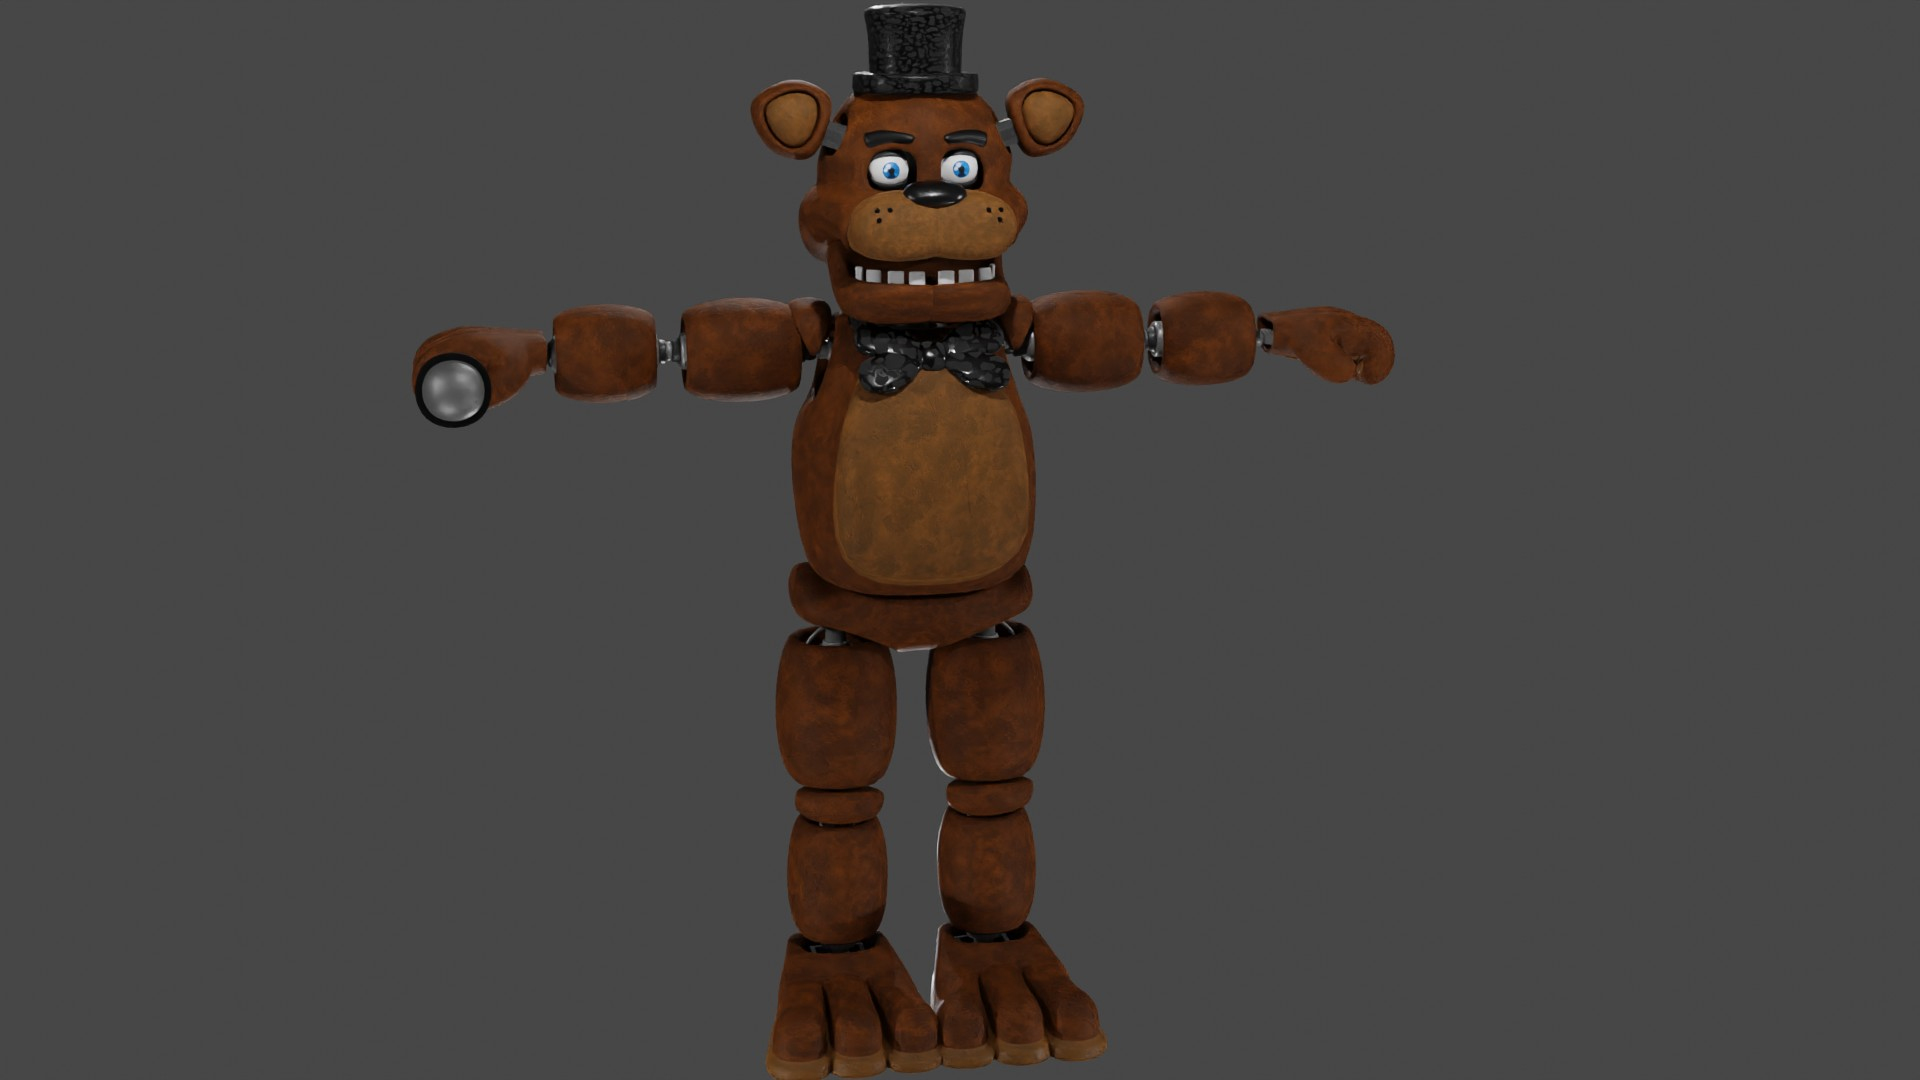 Here's a 3D render I did earlier of Withered Freddy! Not much to